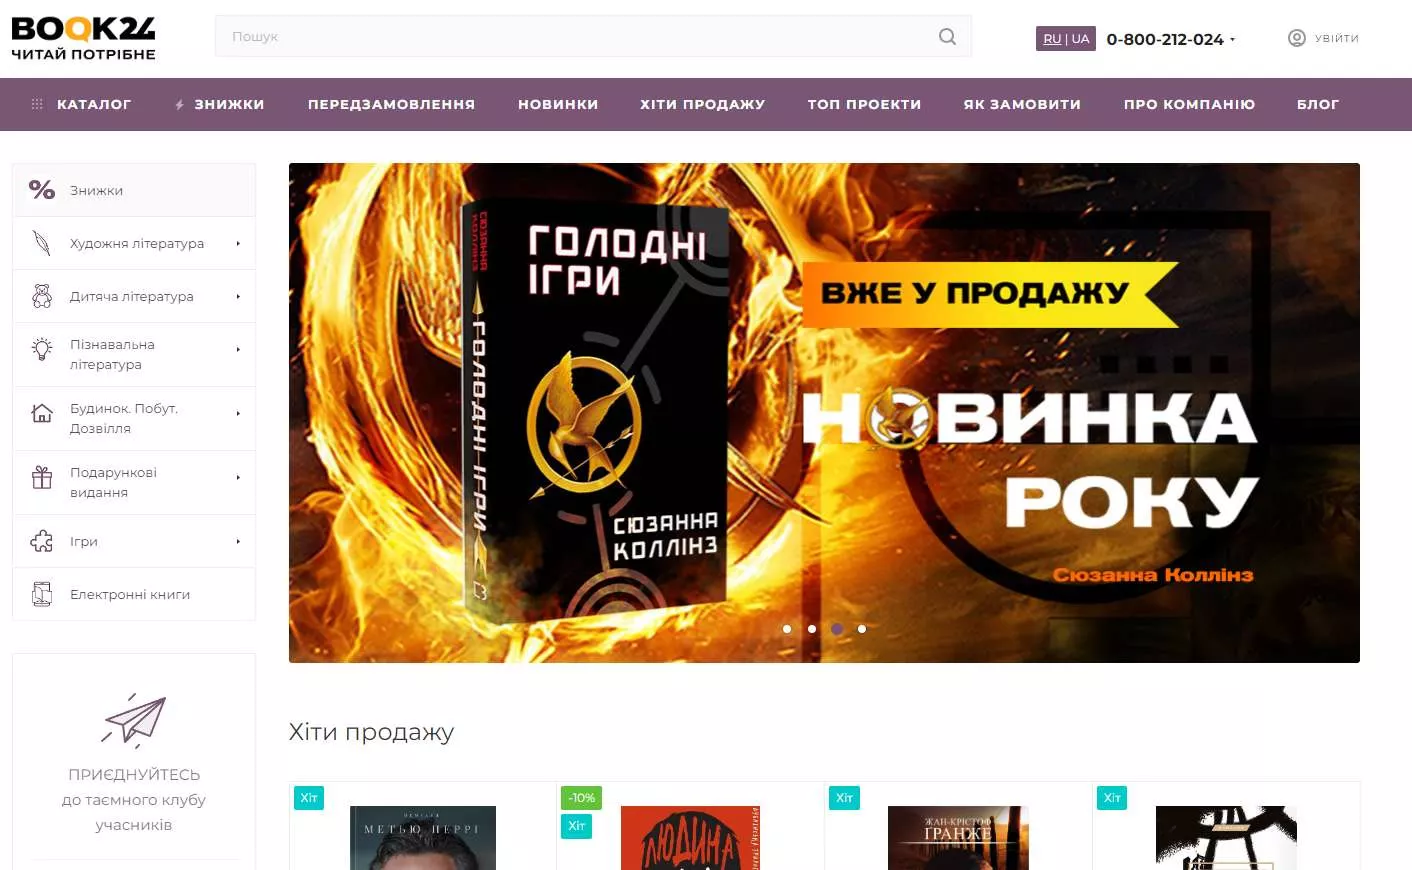 Promotional banner for "The Hunger Games" book with a fiery backdrop and iconic mockingjay symbol in an ukrainian online bookstore